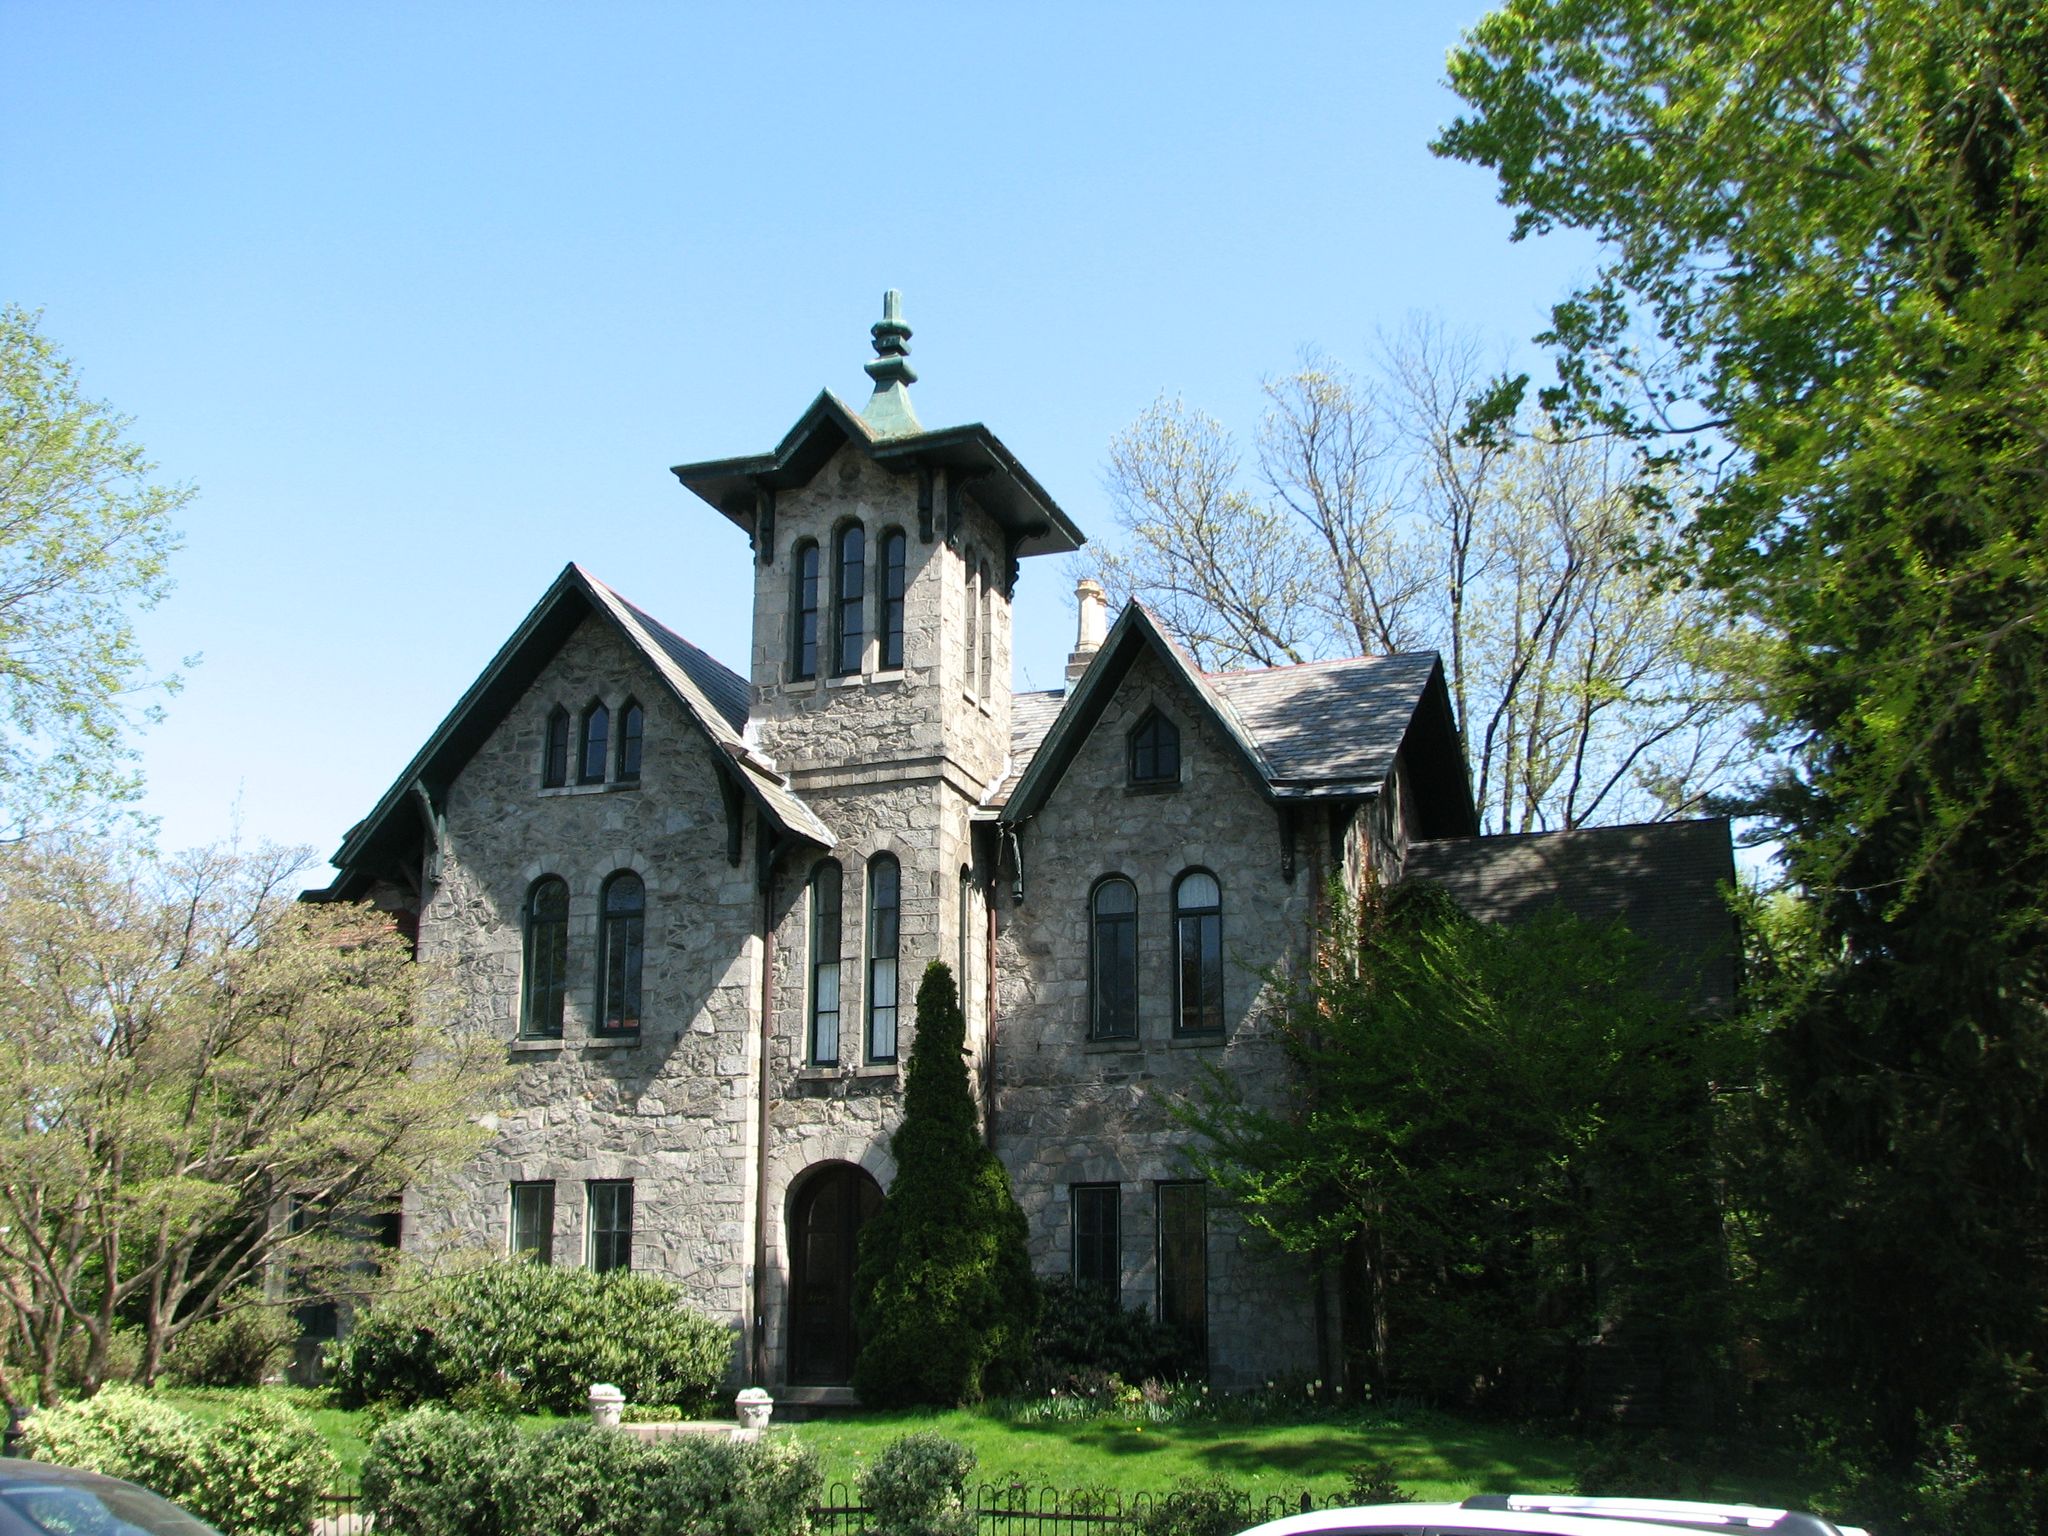 The severe Van Dyke Residence, 150 West Walnut, is also attributed to Samuel Sloan.